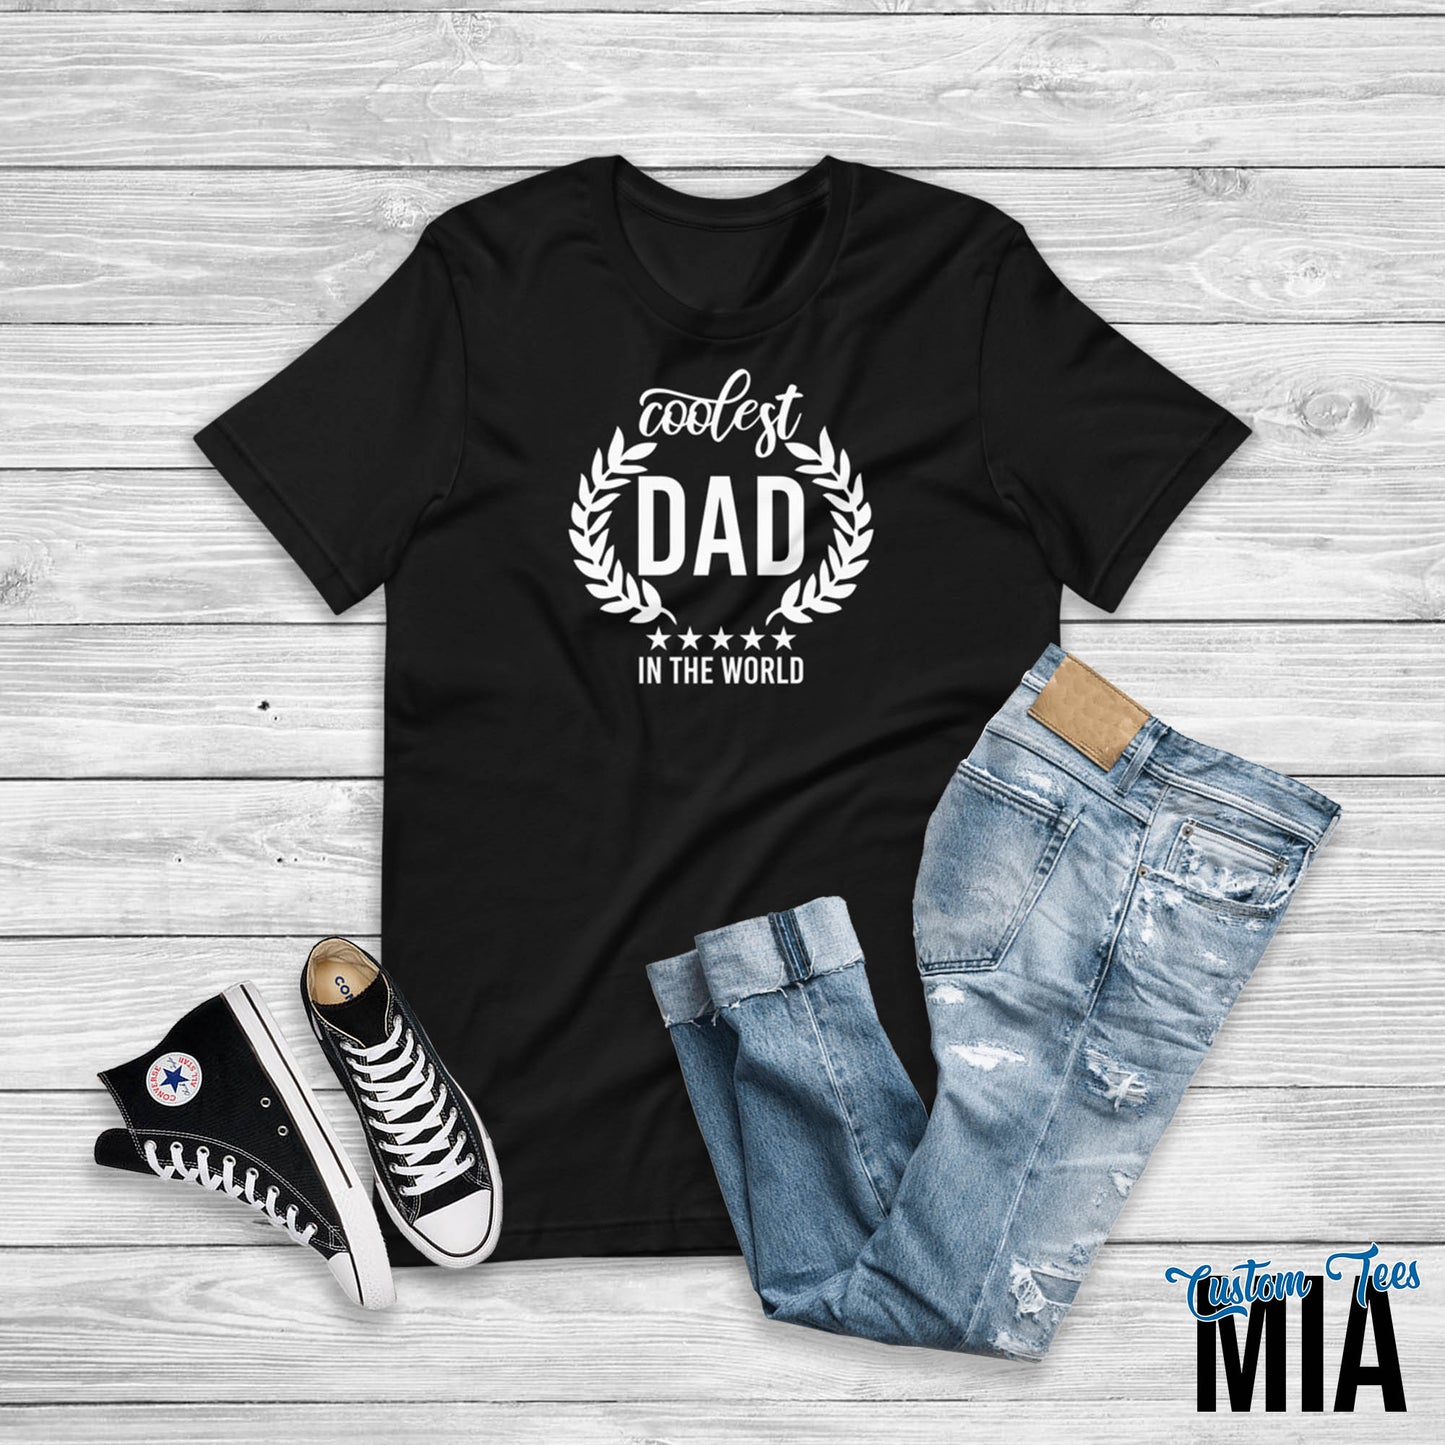 Coolest Dad In The World Shirt - Custom Tees MIA